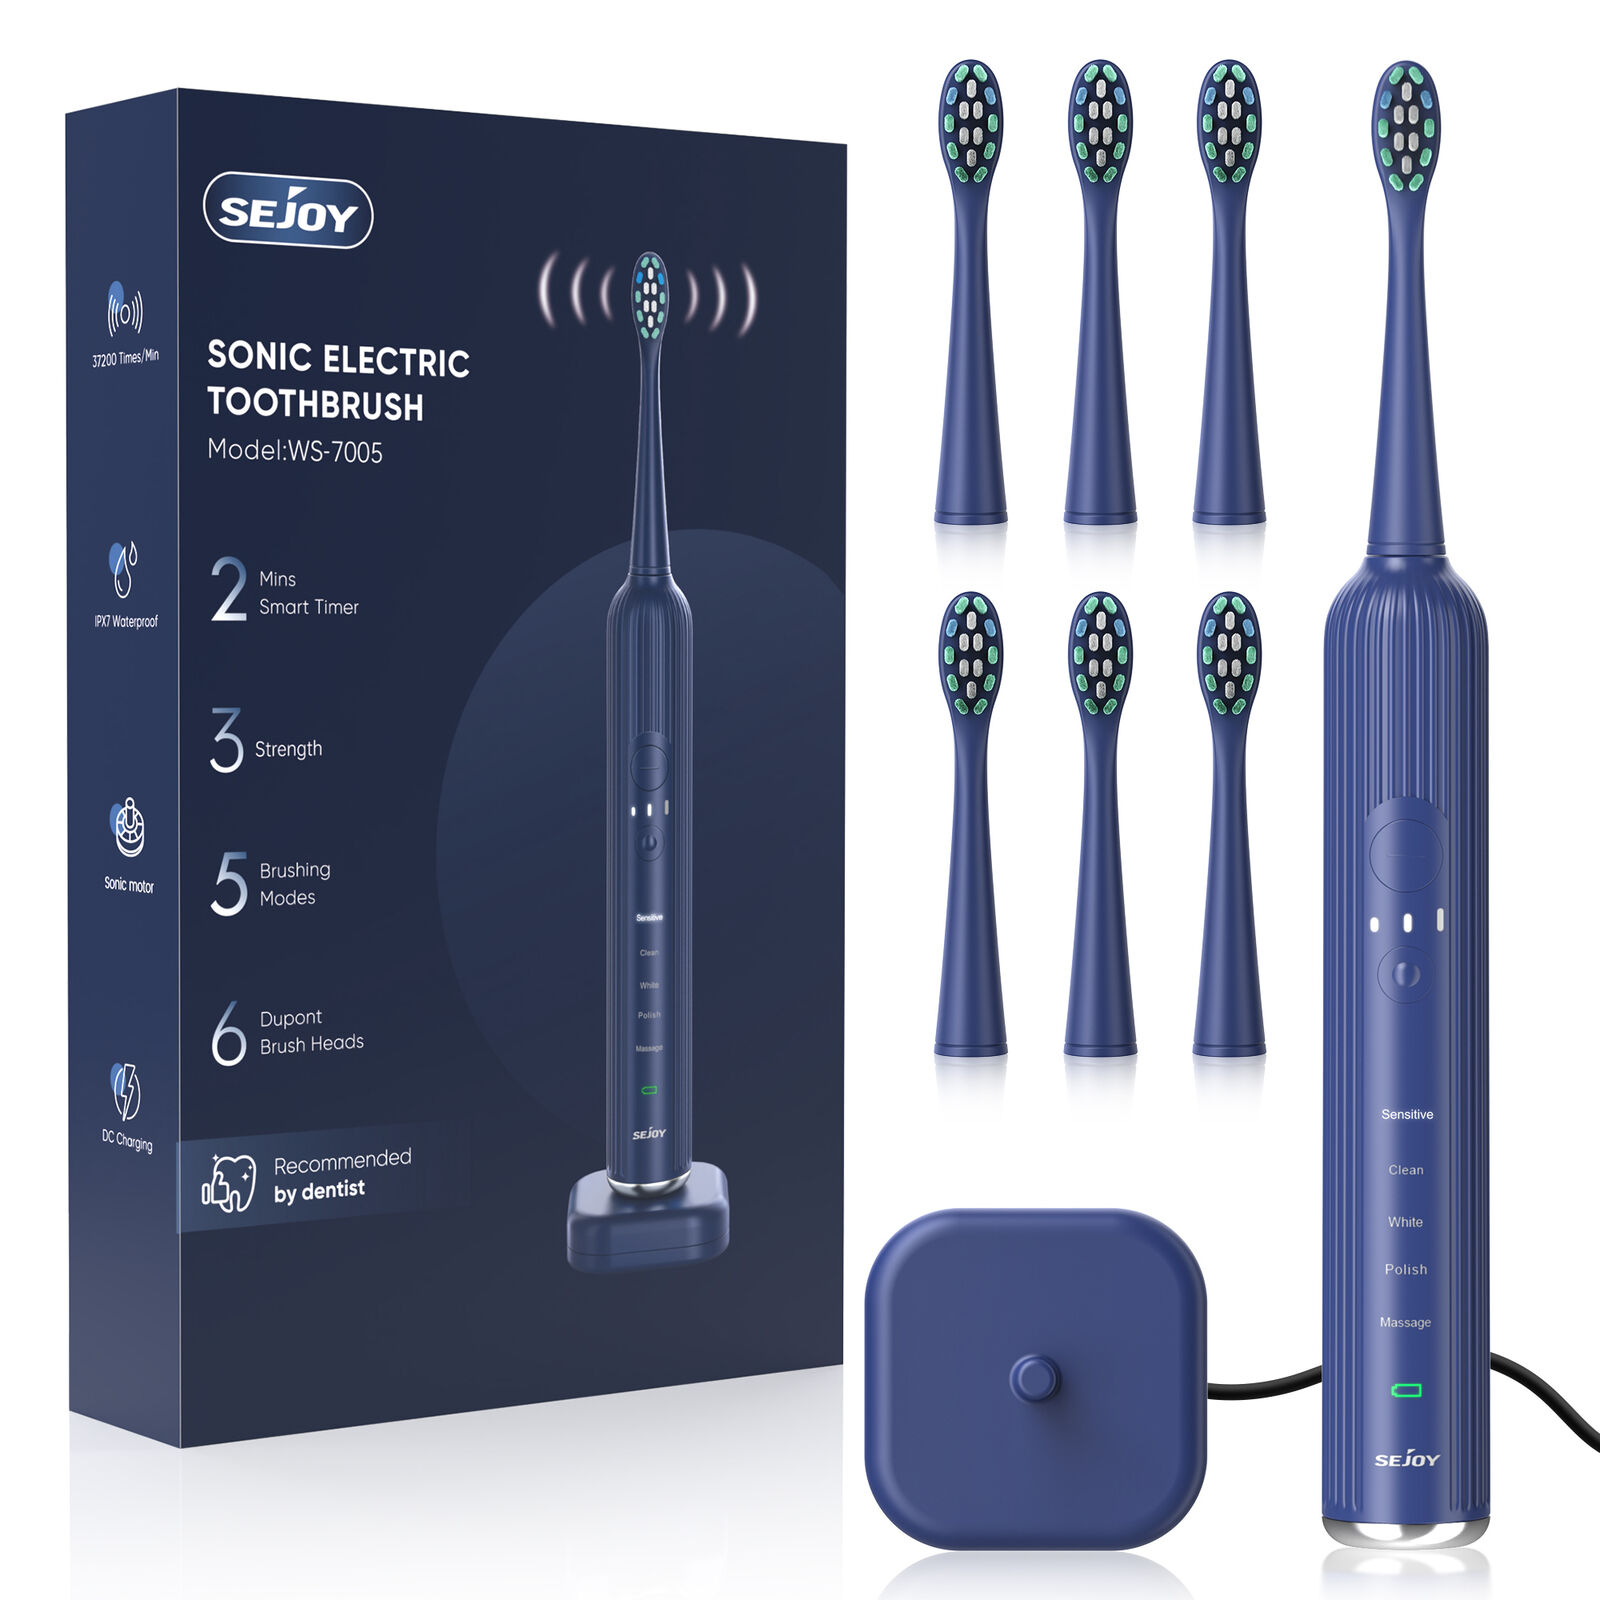 SEJOY Sonic Electric Toothbrush 5 Mode 3 Intensity Wireless Charge 6 Brush Heads